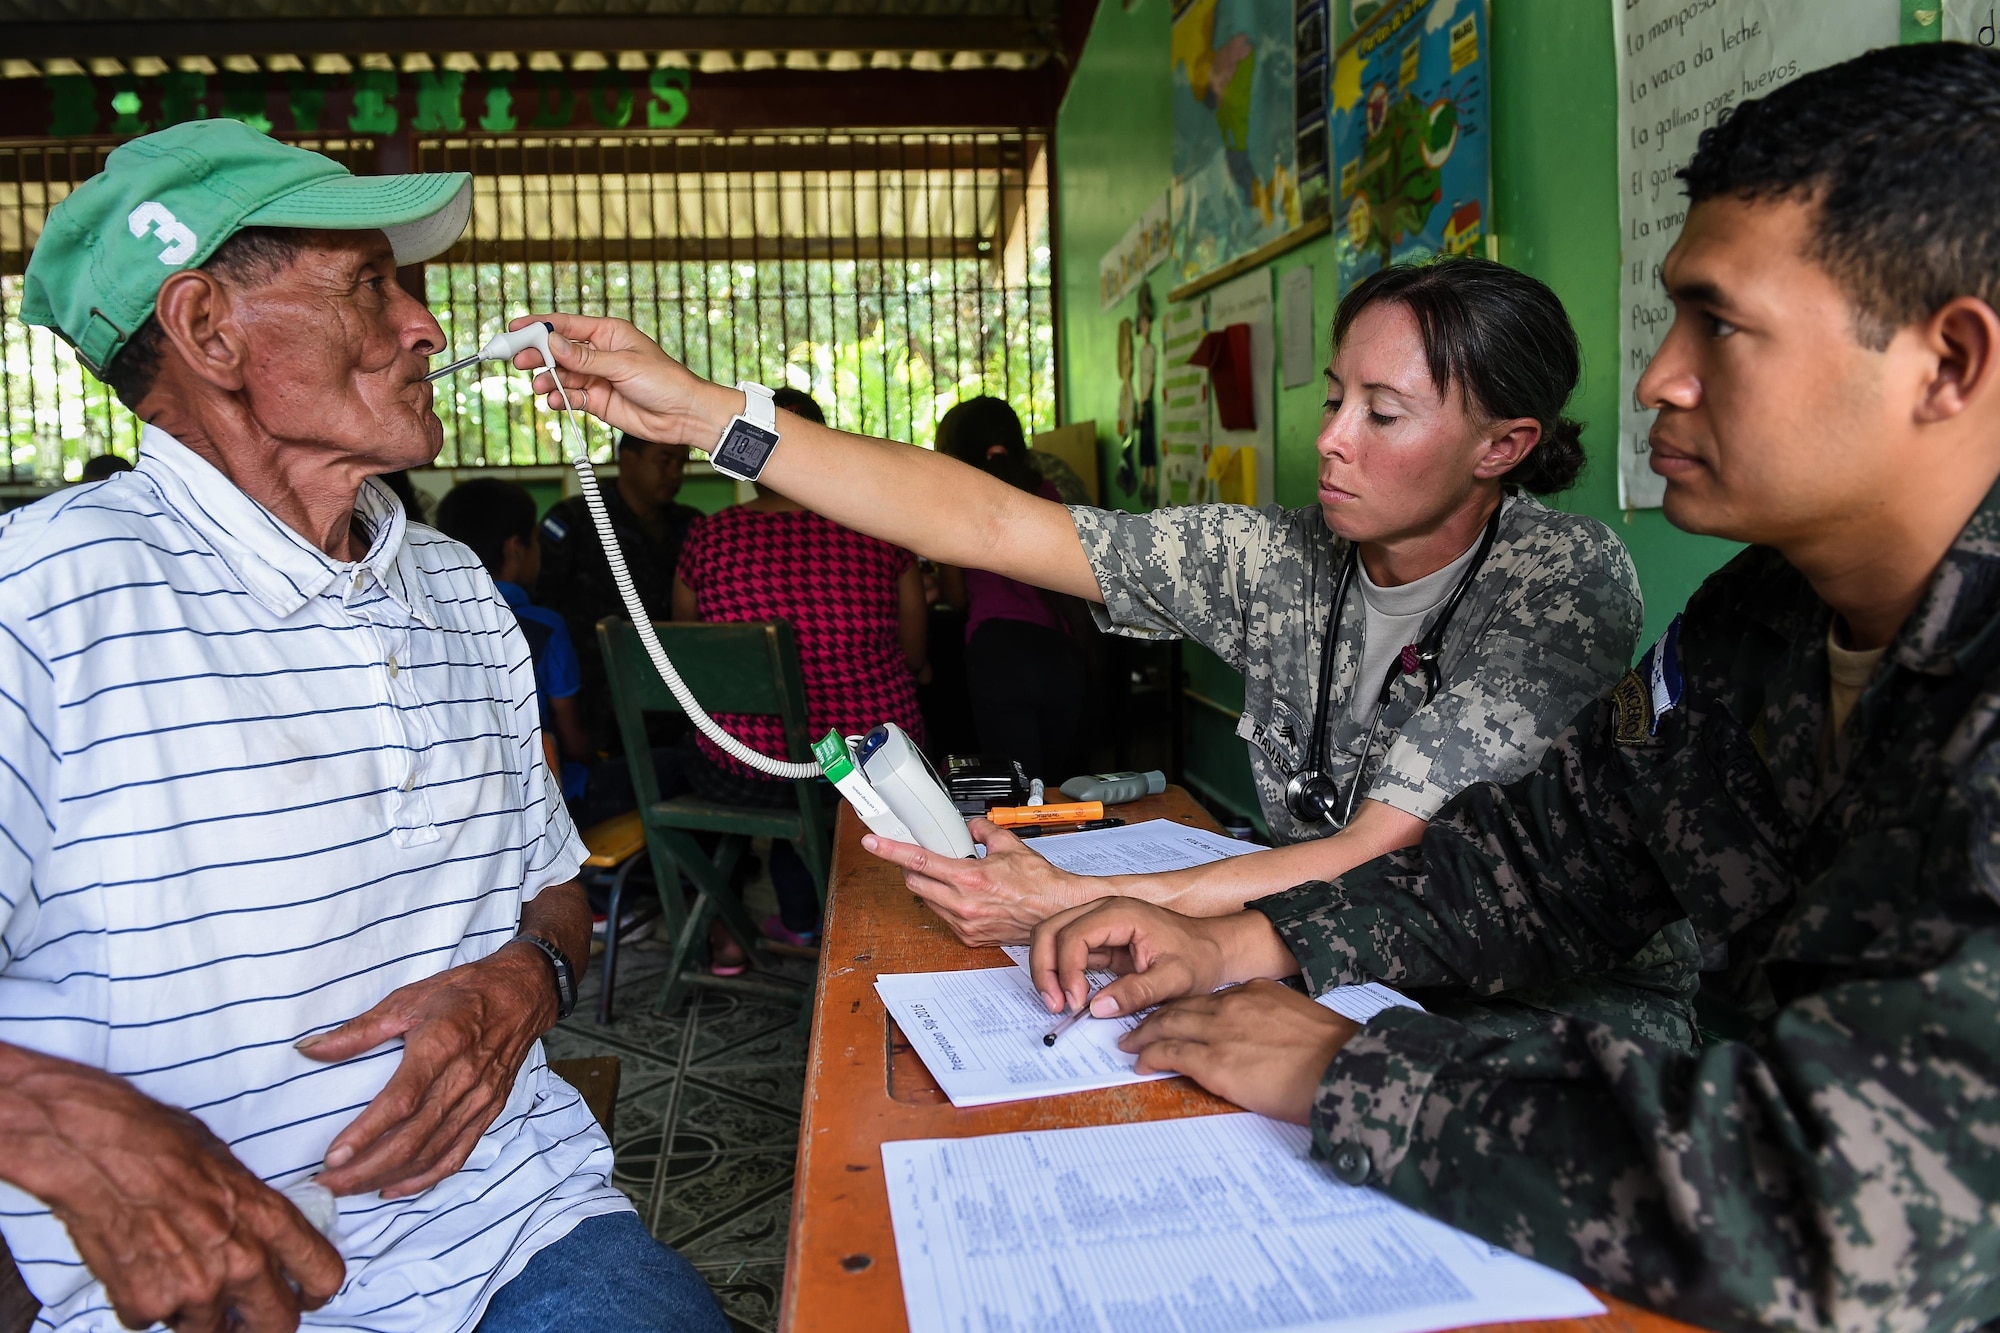 U.S. Army Sgt. Yanna Ramaekers, Joint Task Force-Bravo Medical Element health care specialist, takes a patient’s temperature reading during a medical readiness training exercise, or MEDRETE, in the village of Bacadilla, Olancho district, Honduras, Sept. 22, 2016. Members of the Honduran military and local civilians volunteered their time to translate for the JTF-Bravo MEDEL team.